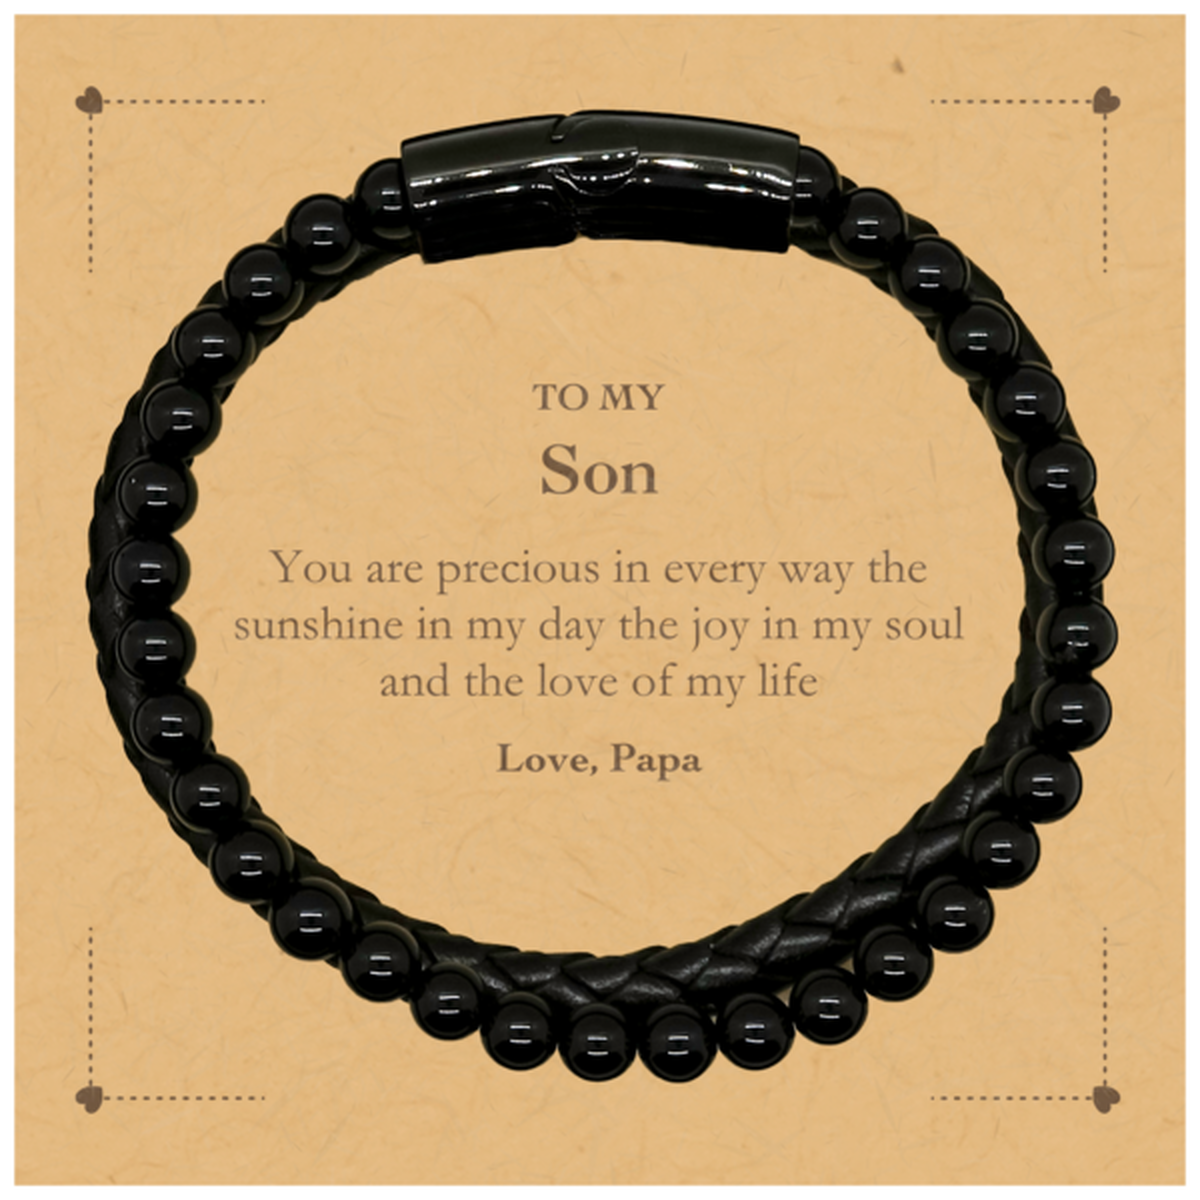 Graduation Gifts for Son Stone Leather Bracelets Present from Papa, Christmas Son Birthday Gifts Son You are precious in every way the sunshine in my day. Love, Papa